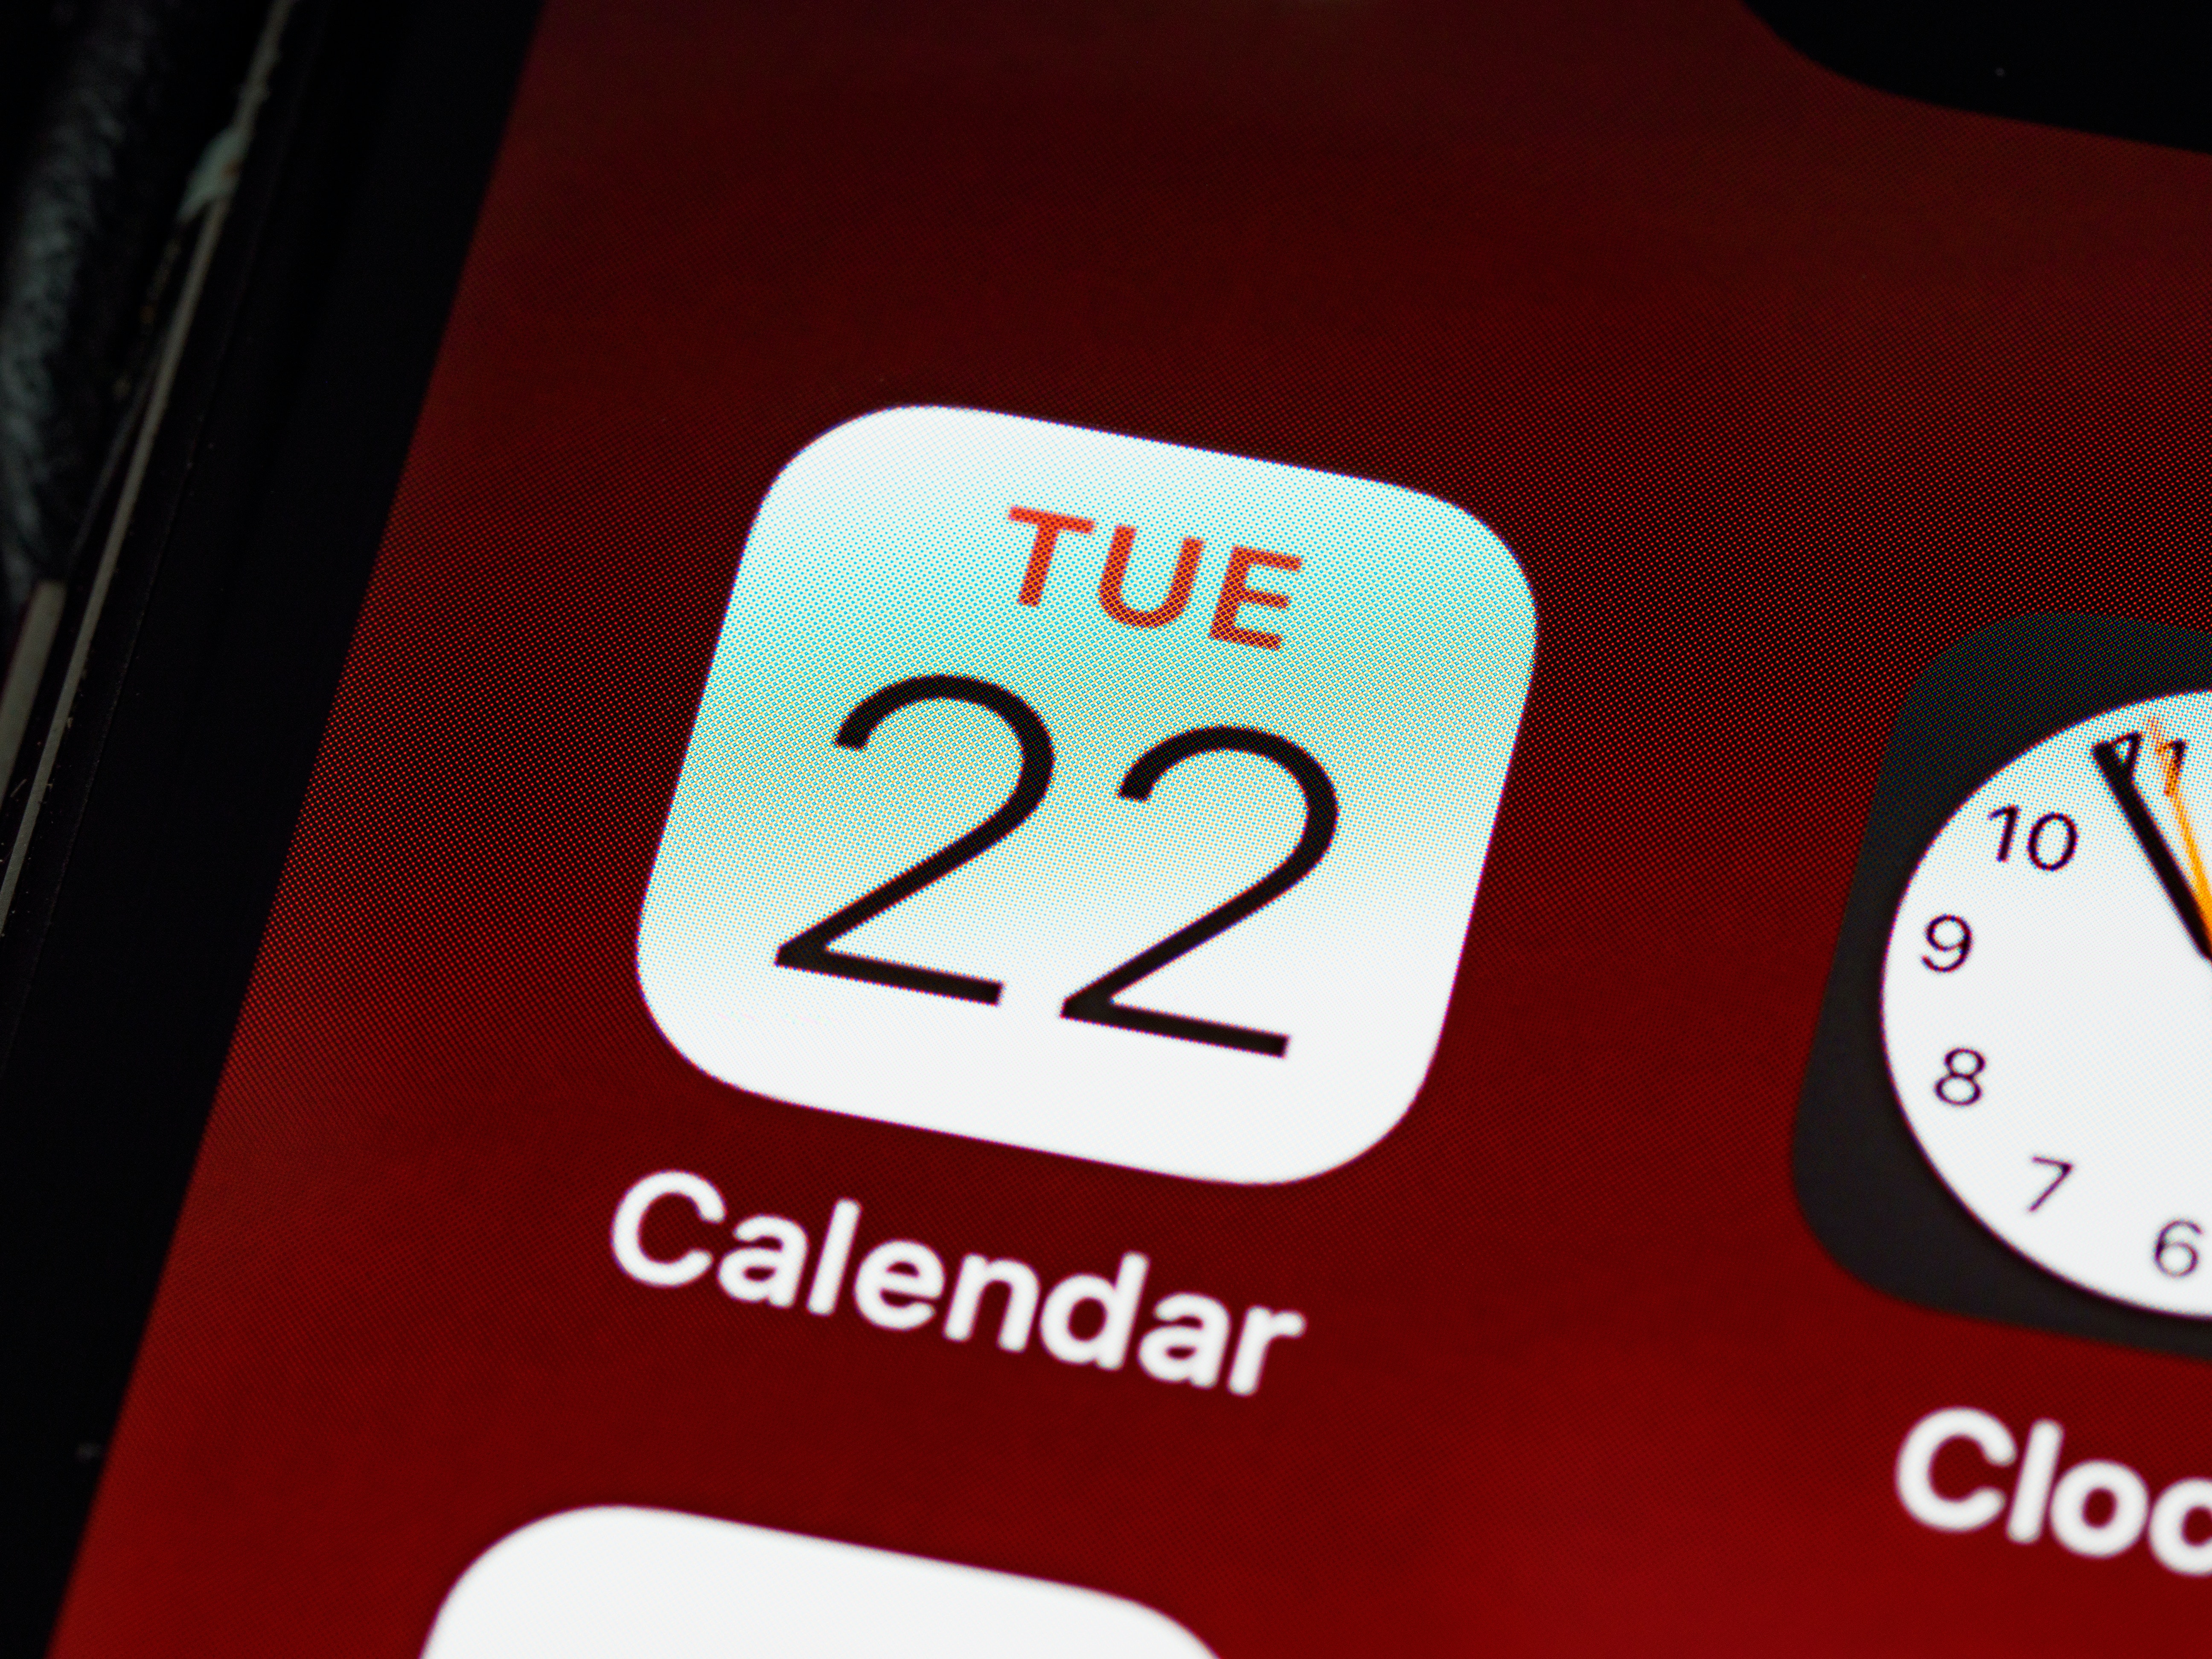 How To Stop Calendar Spam On An IPhone